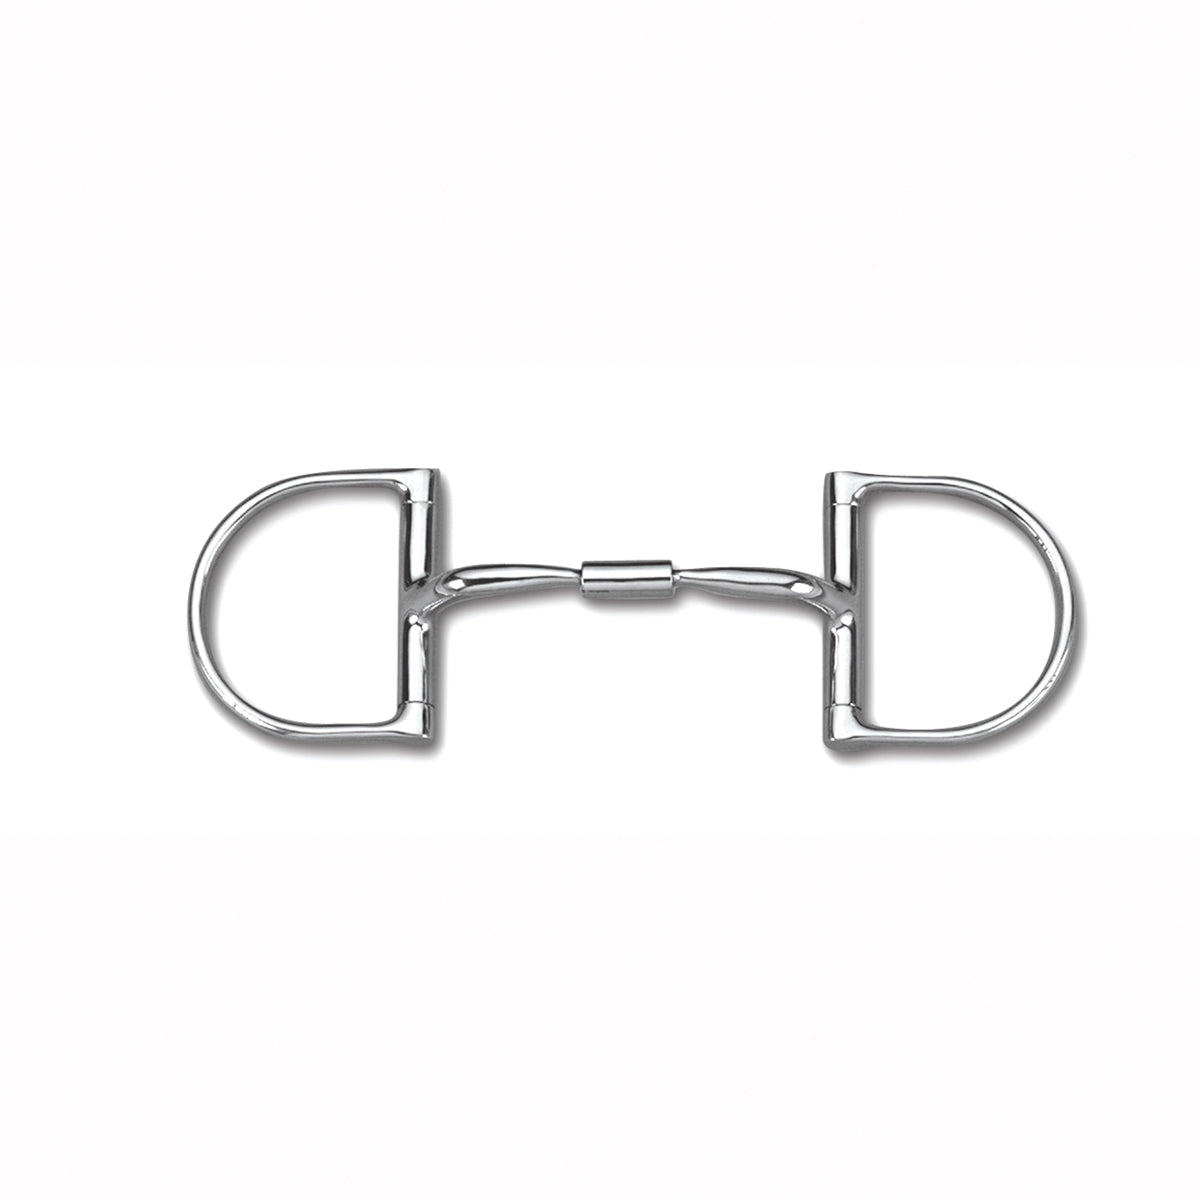 Myler Dee without Hooks with Stainless Steel Comfort Snaffle Wide Barrel MB 02